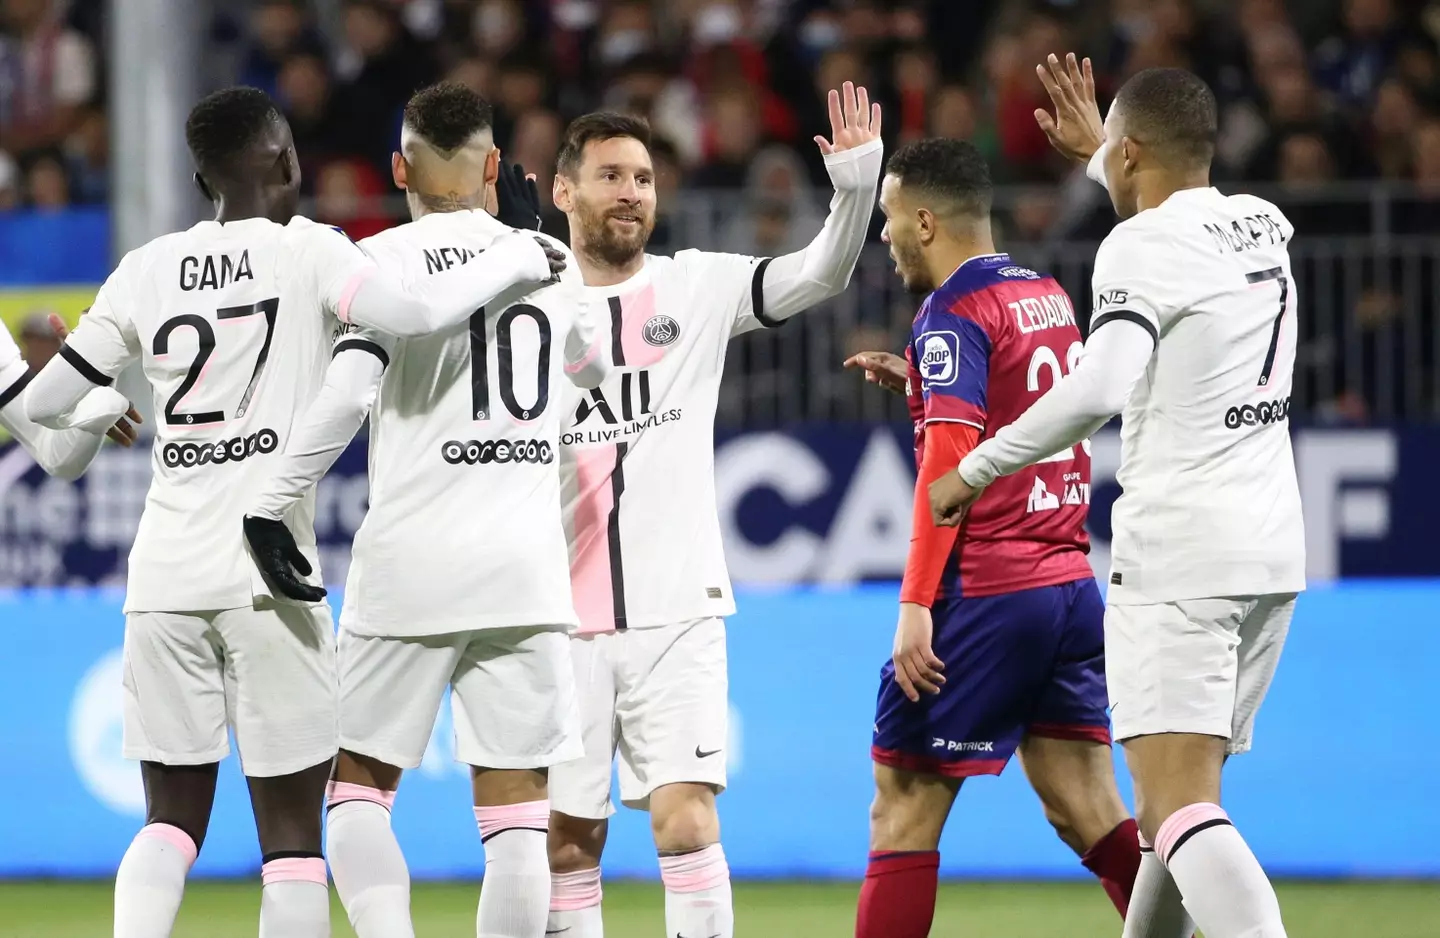 Messi set up three goals in PSG's 6-1 win over Clermont (Image: PA)